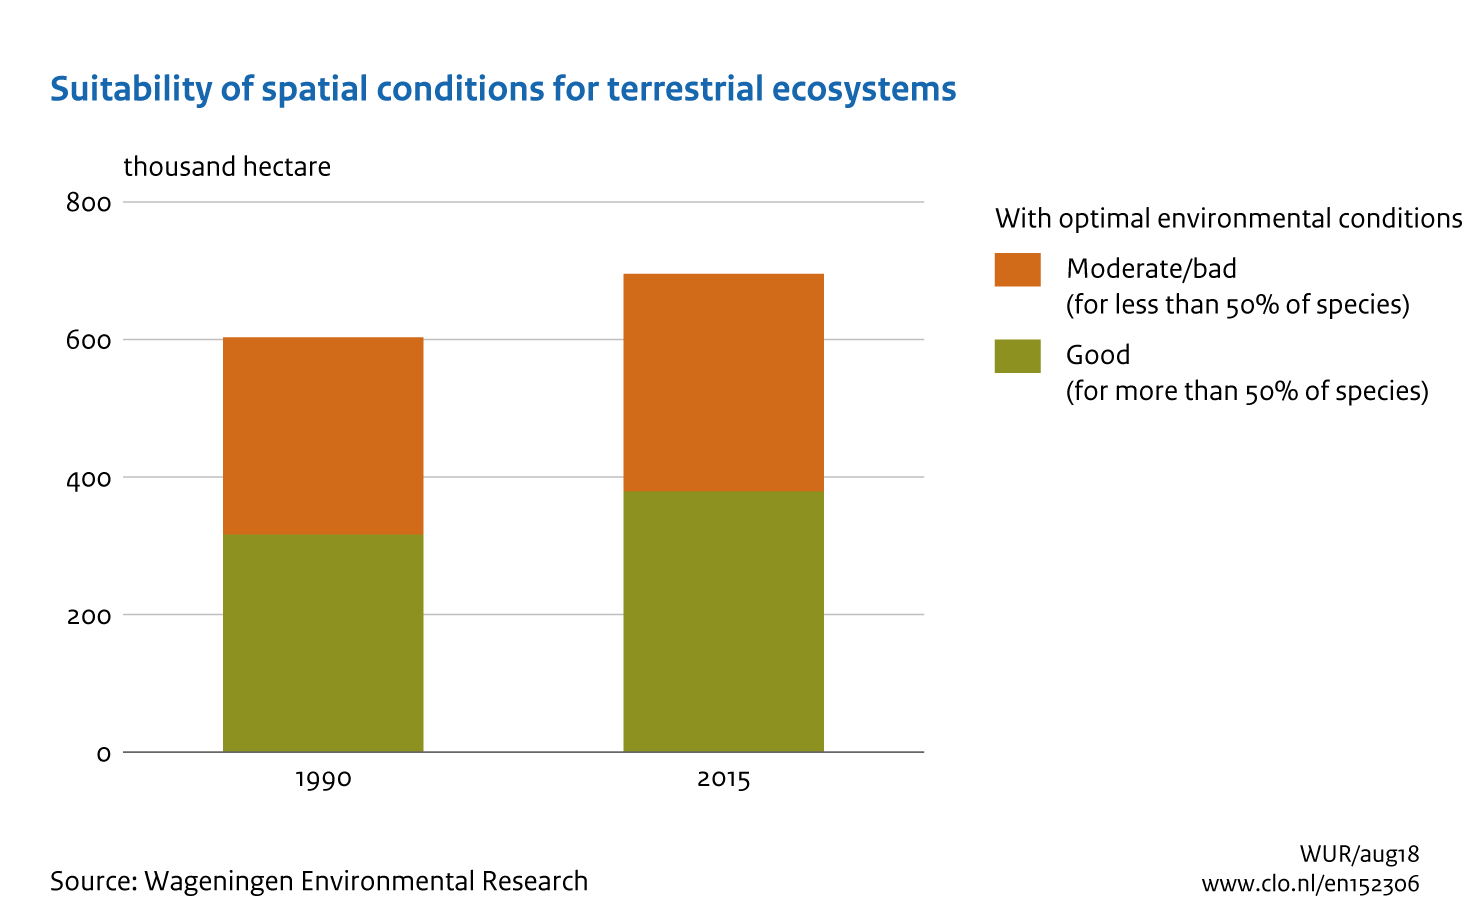 Image Suitability of spatial conditions for terrestrial ecosystems. The image is further explained in the text.